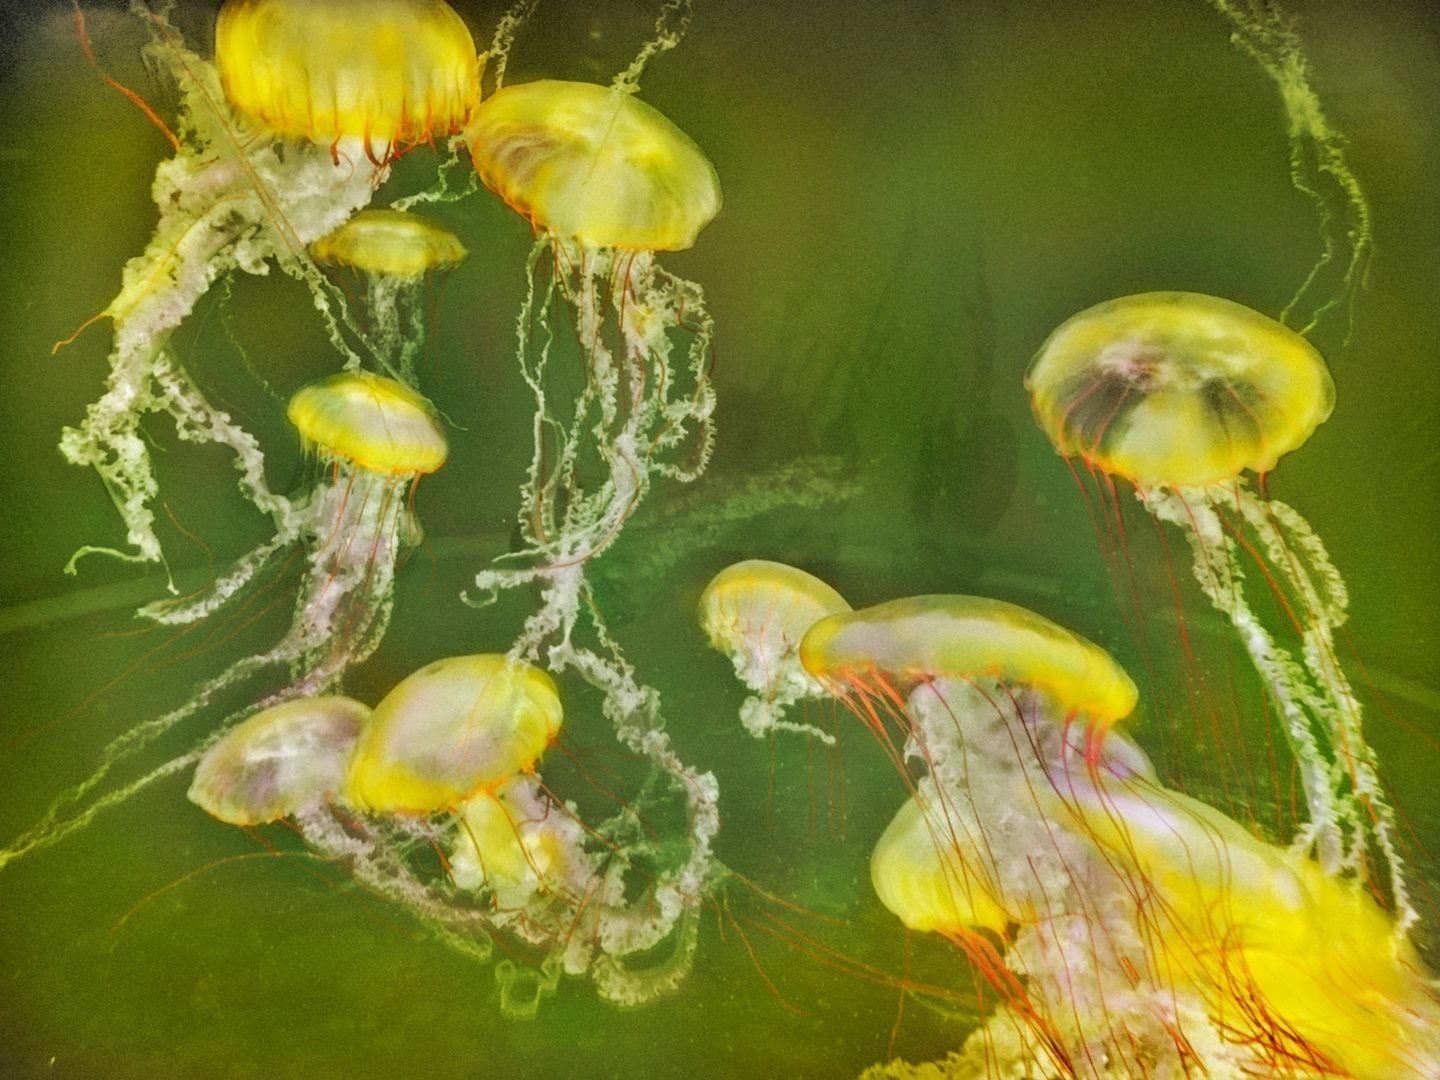 A group of yellow jellyfish floating in the water.